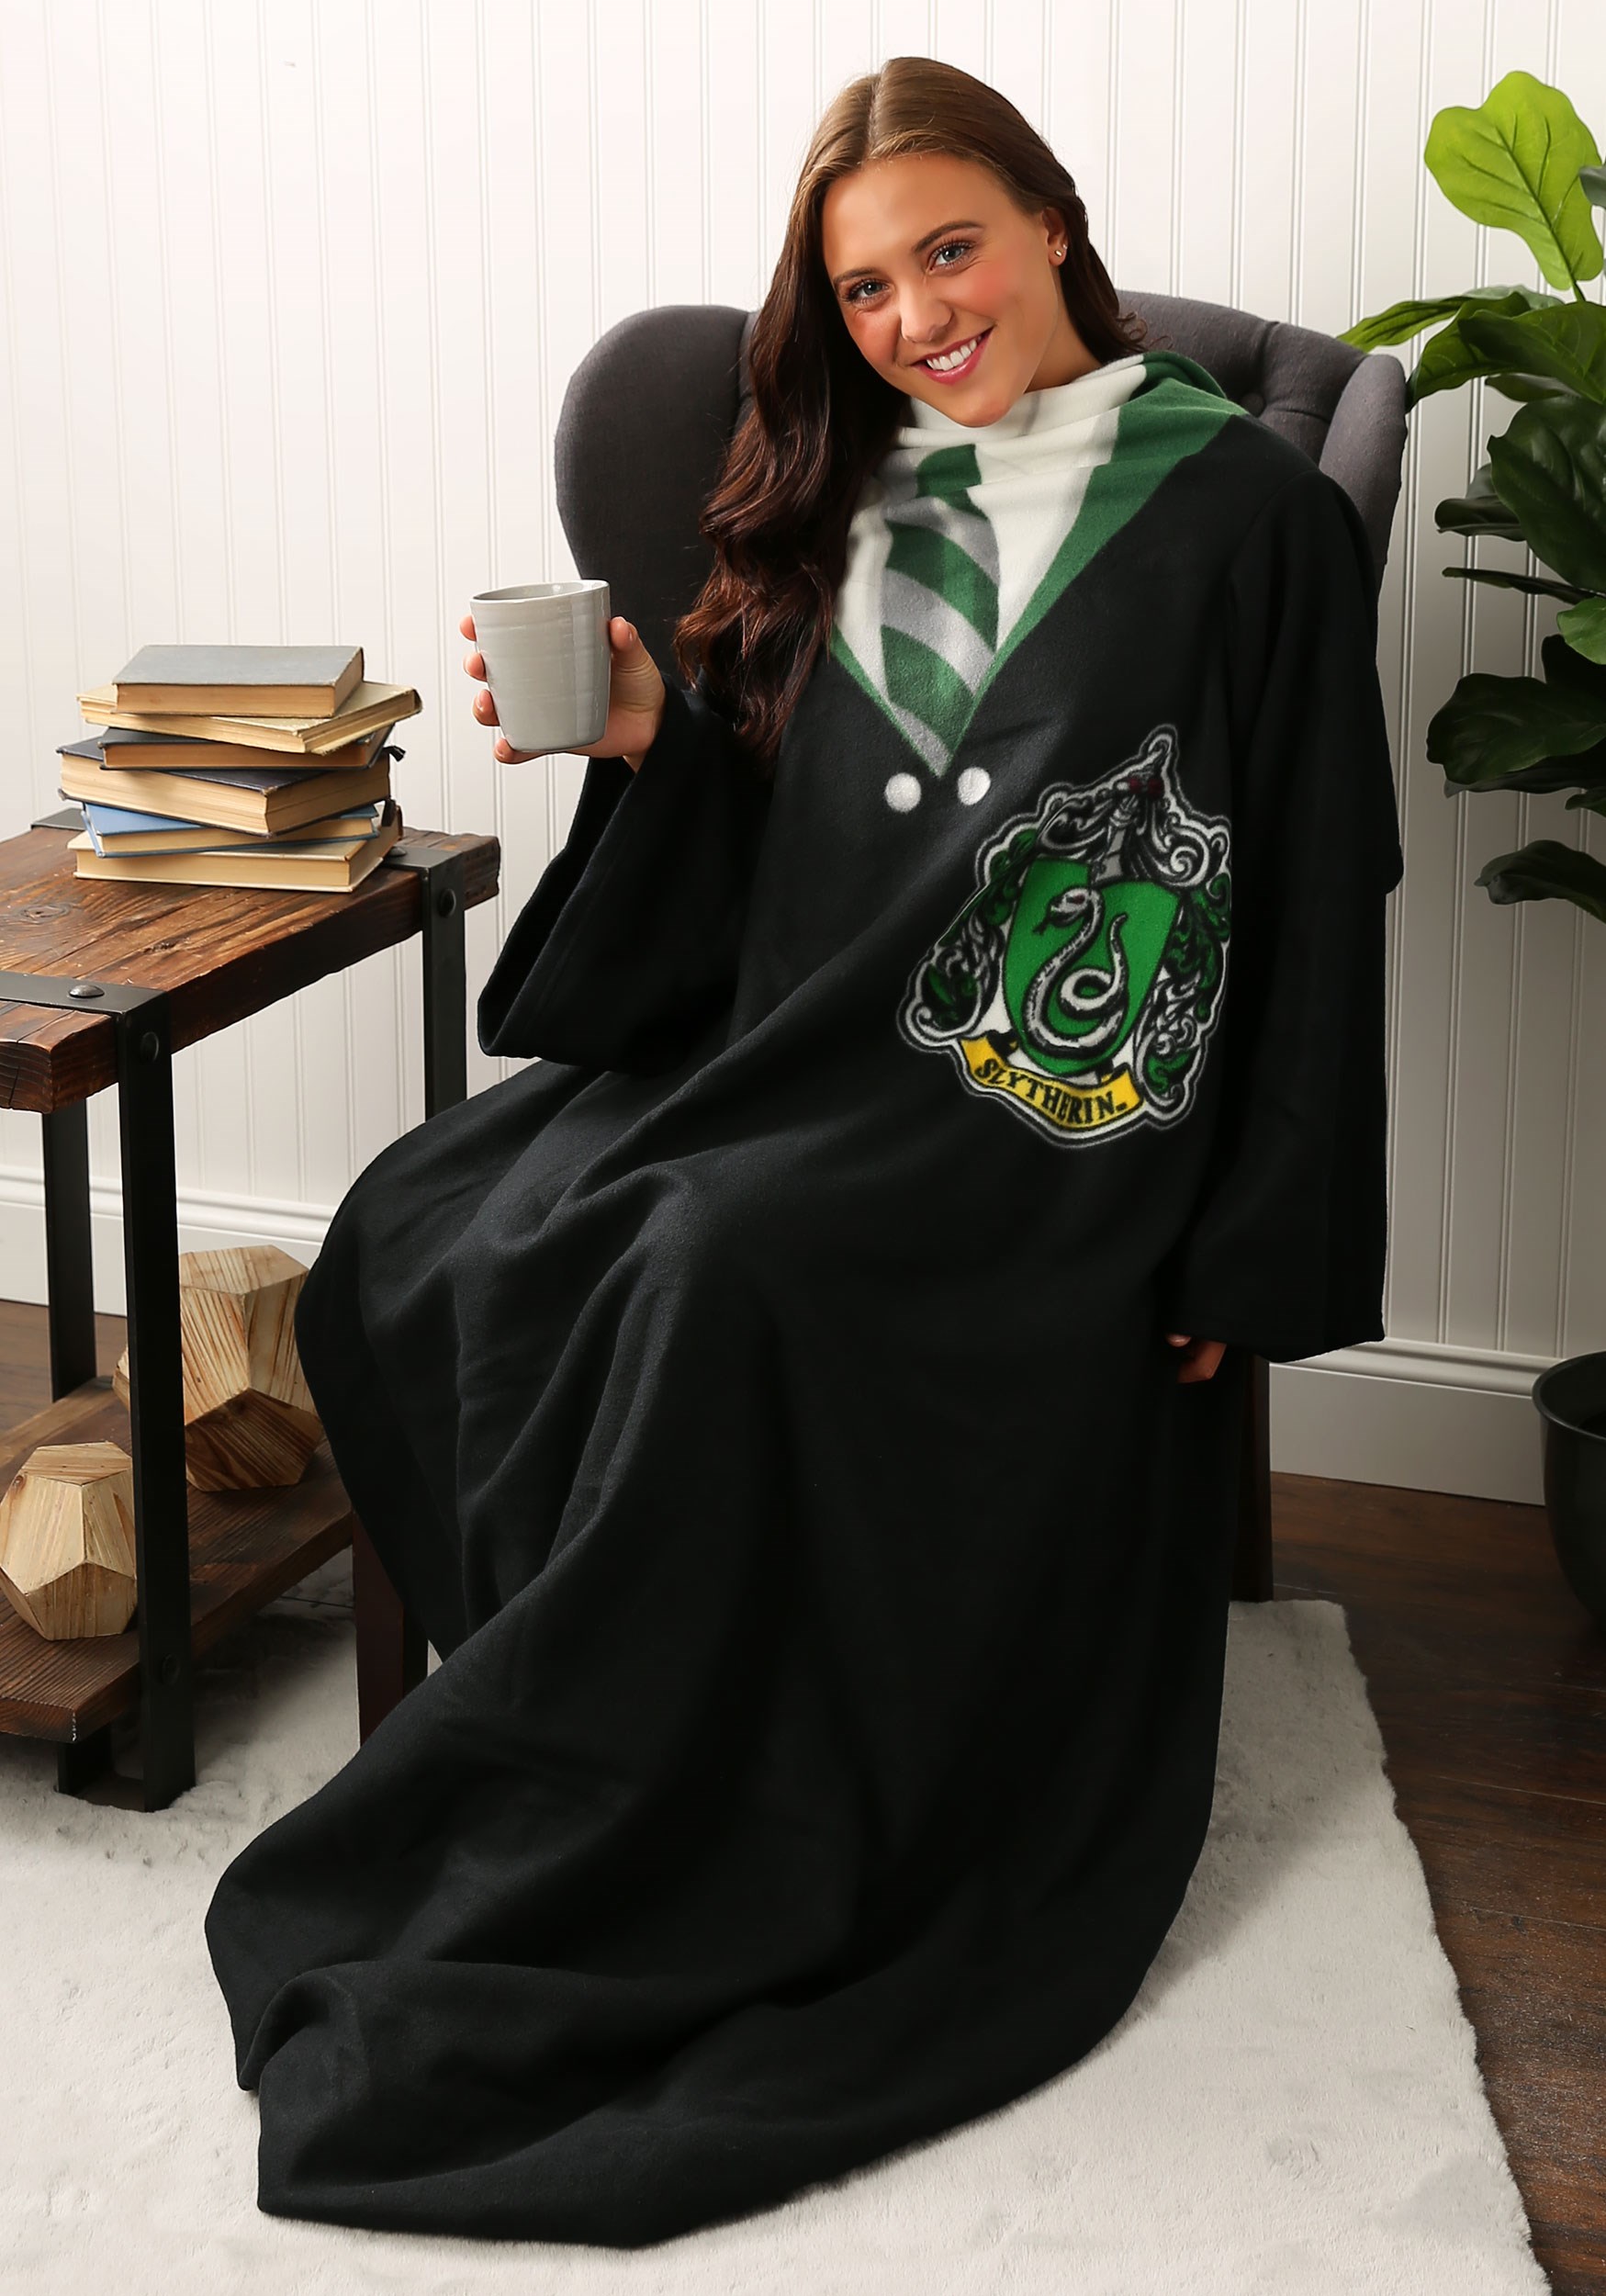 https://images.fun.com/products/56378/1-1/harry-potter-slytherin-comfy-blanket-throw.jpg